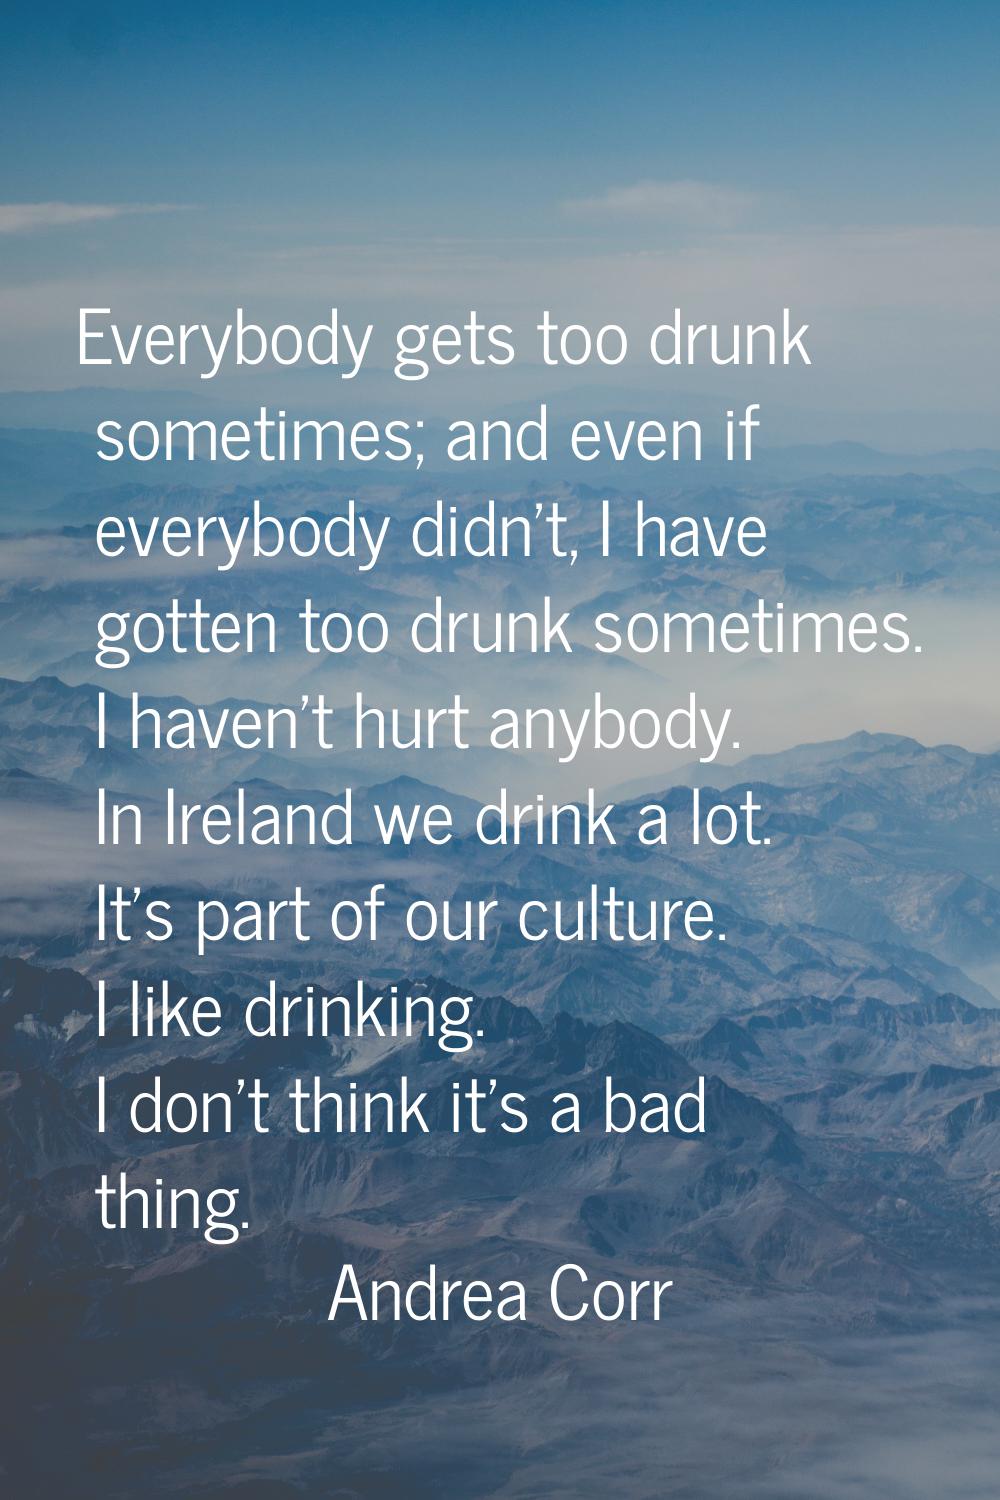 Everybody gets too drunk sometimes; and even if everybody didn't, I have gotten too drunk sometimes